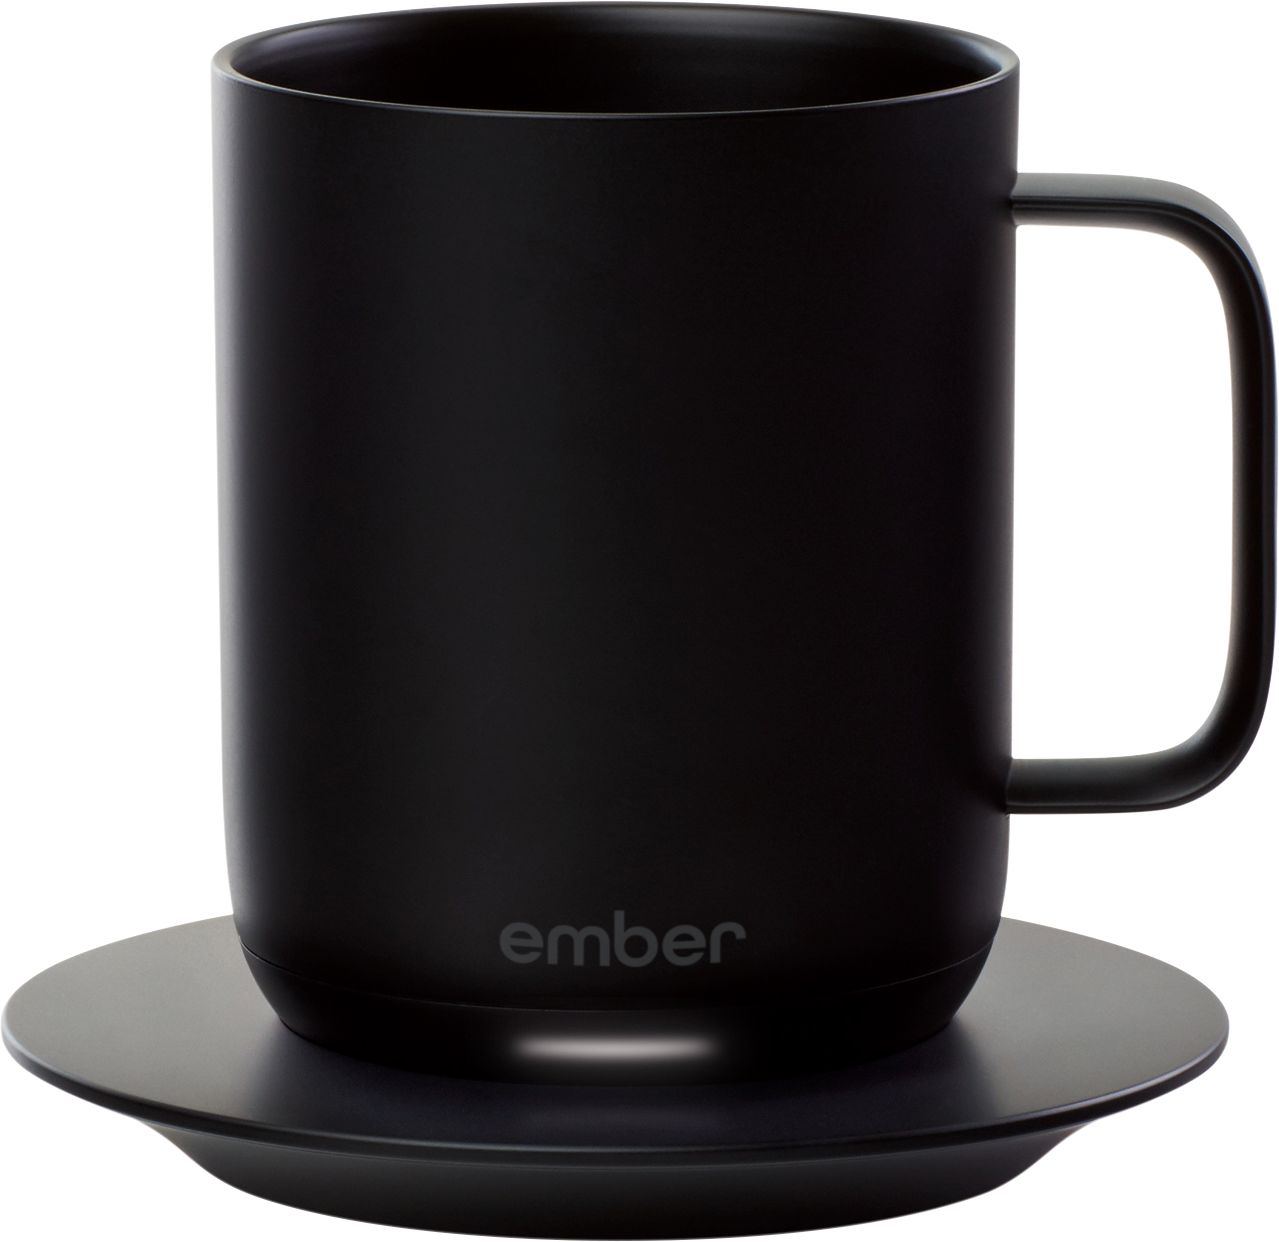 This Ember mug dupe keeps your coffee, cocoa or tea 'piping hot